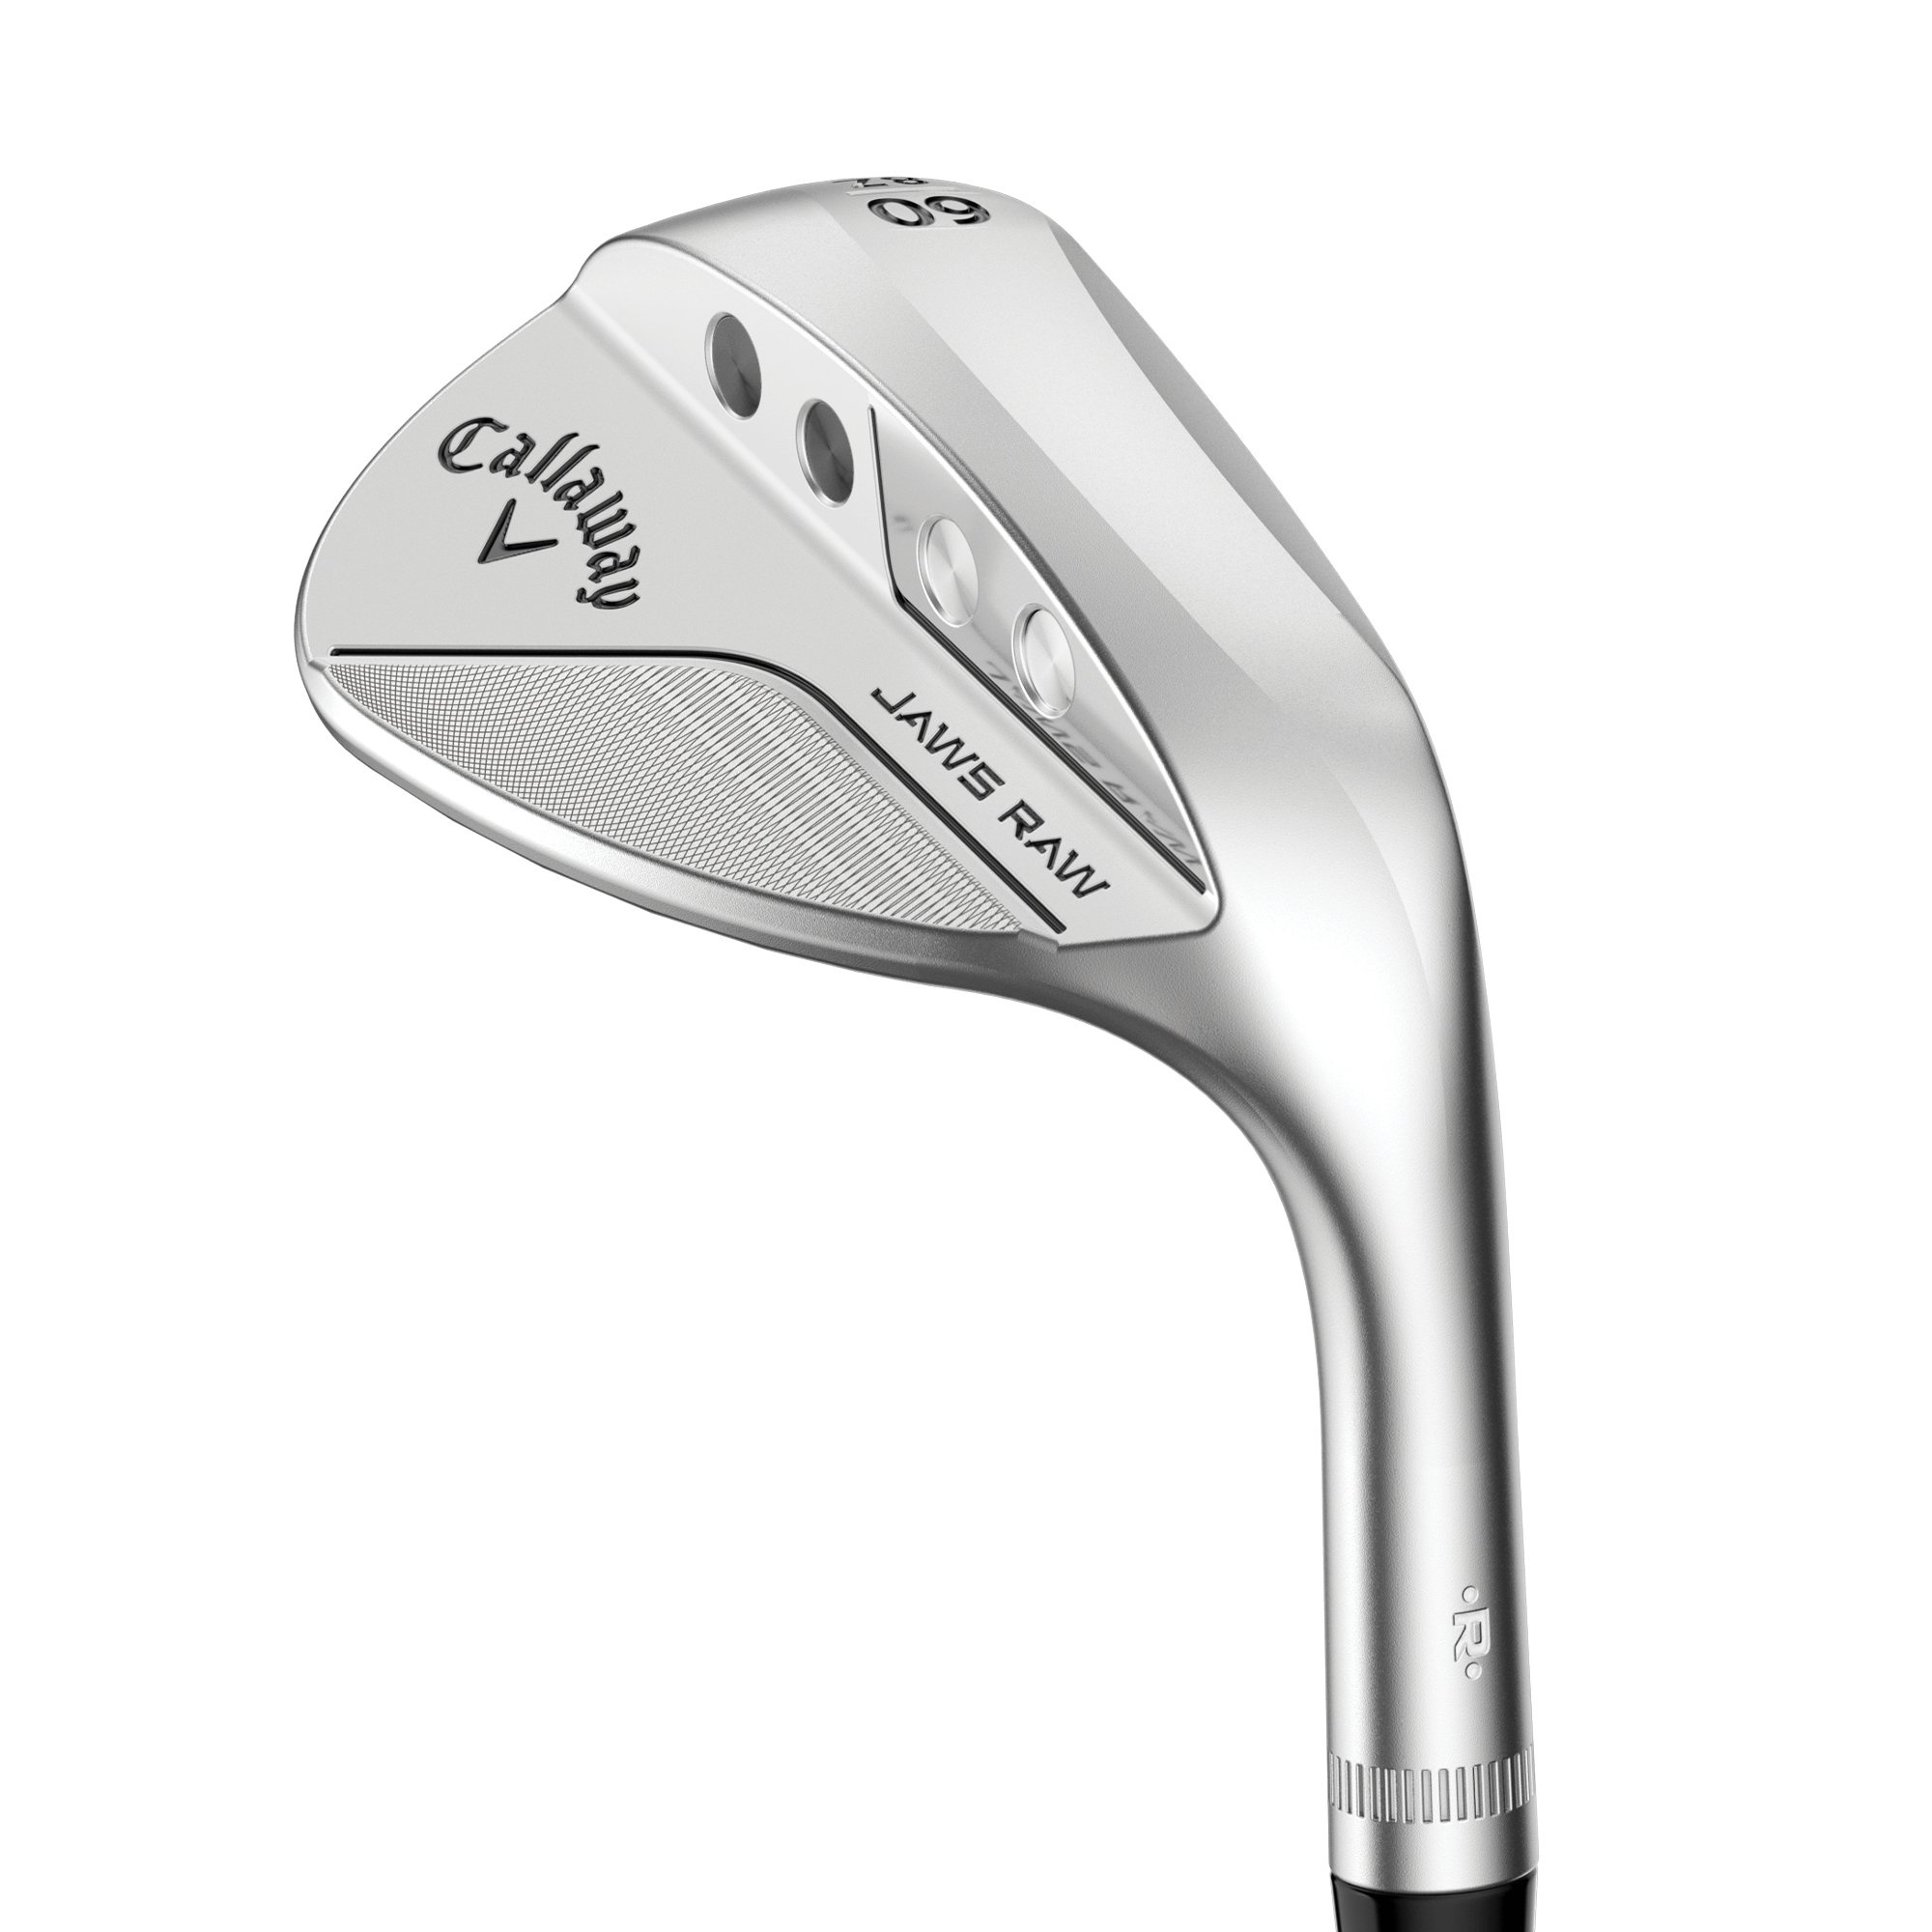 Jaws Raw Face Chrome Wedges